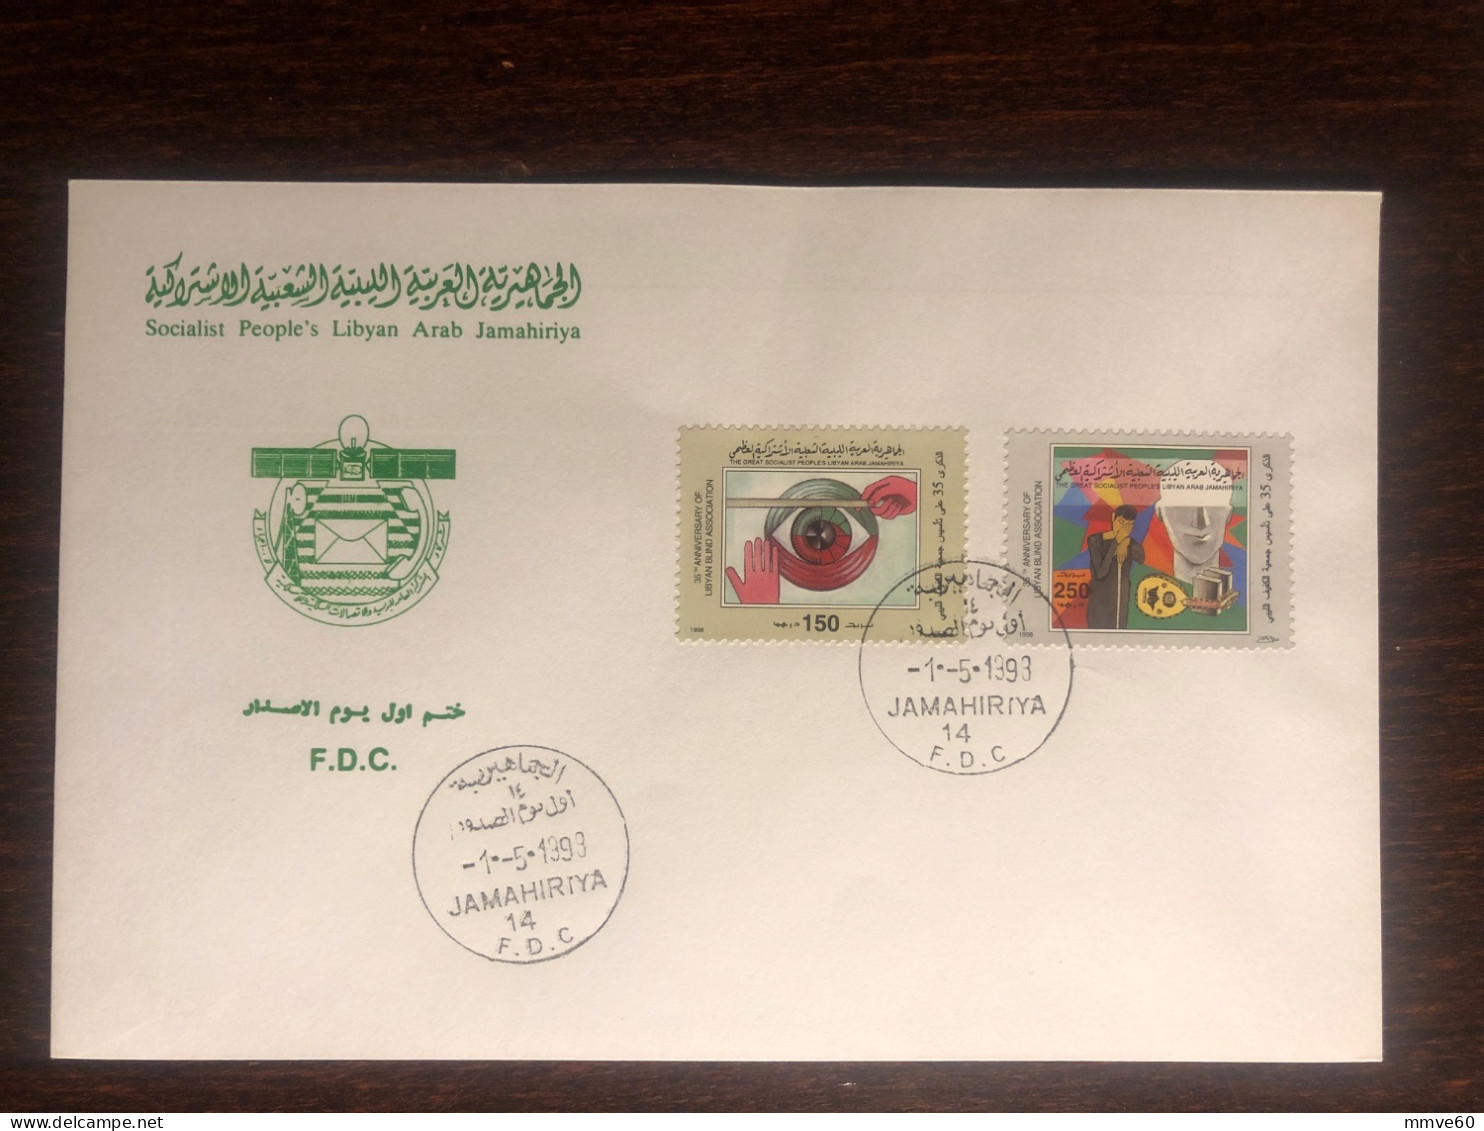 LIBYA  FDC COVER 1998 YEAR BLINDNESS BLIND HEALTH MEDICINE STAMPS - Libyen